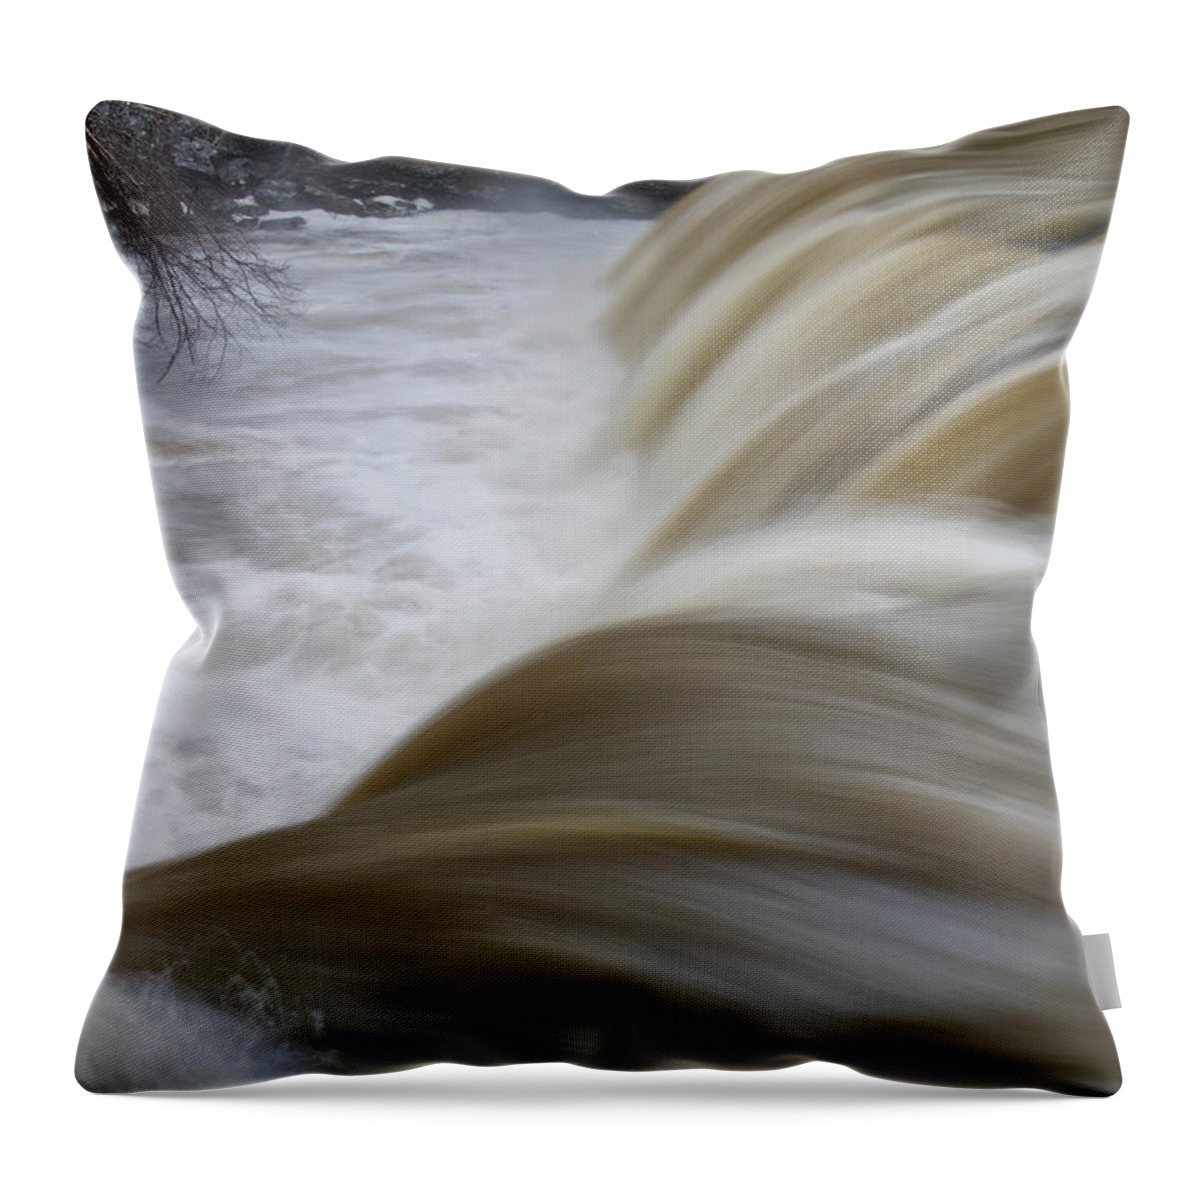 Waterfall Throw Pillow featuring the photograph Potter's Falls 15 by Phil Perkins